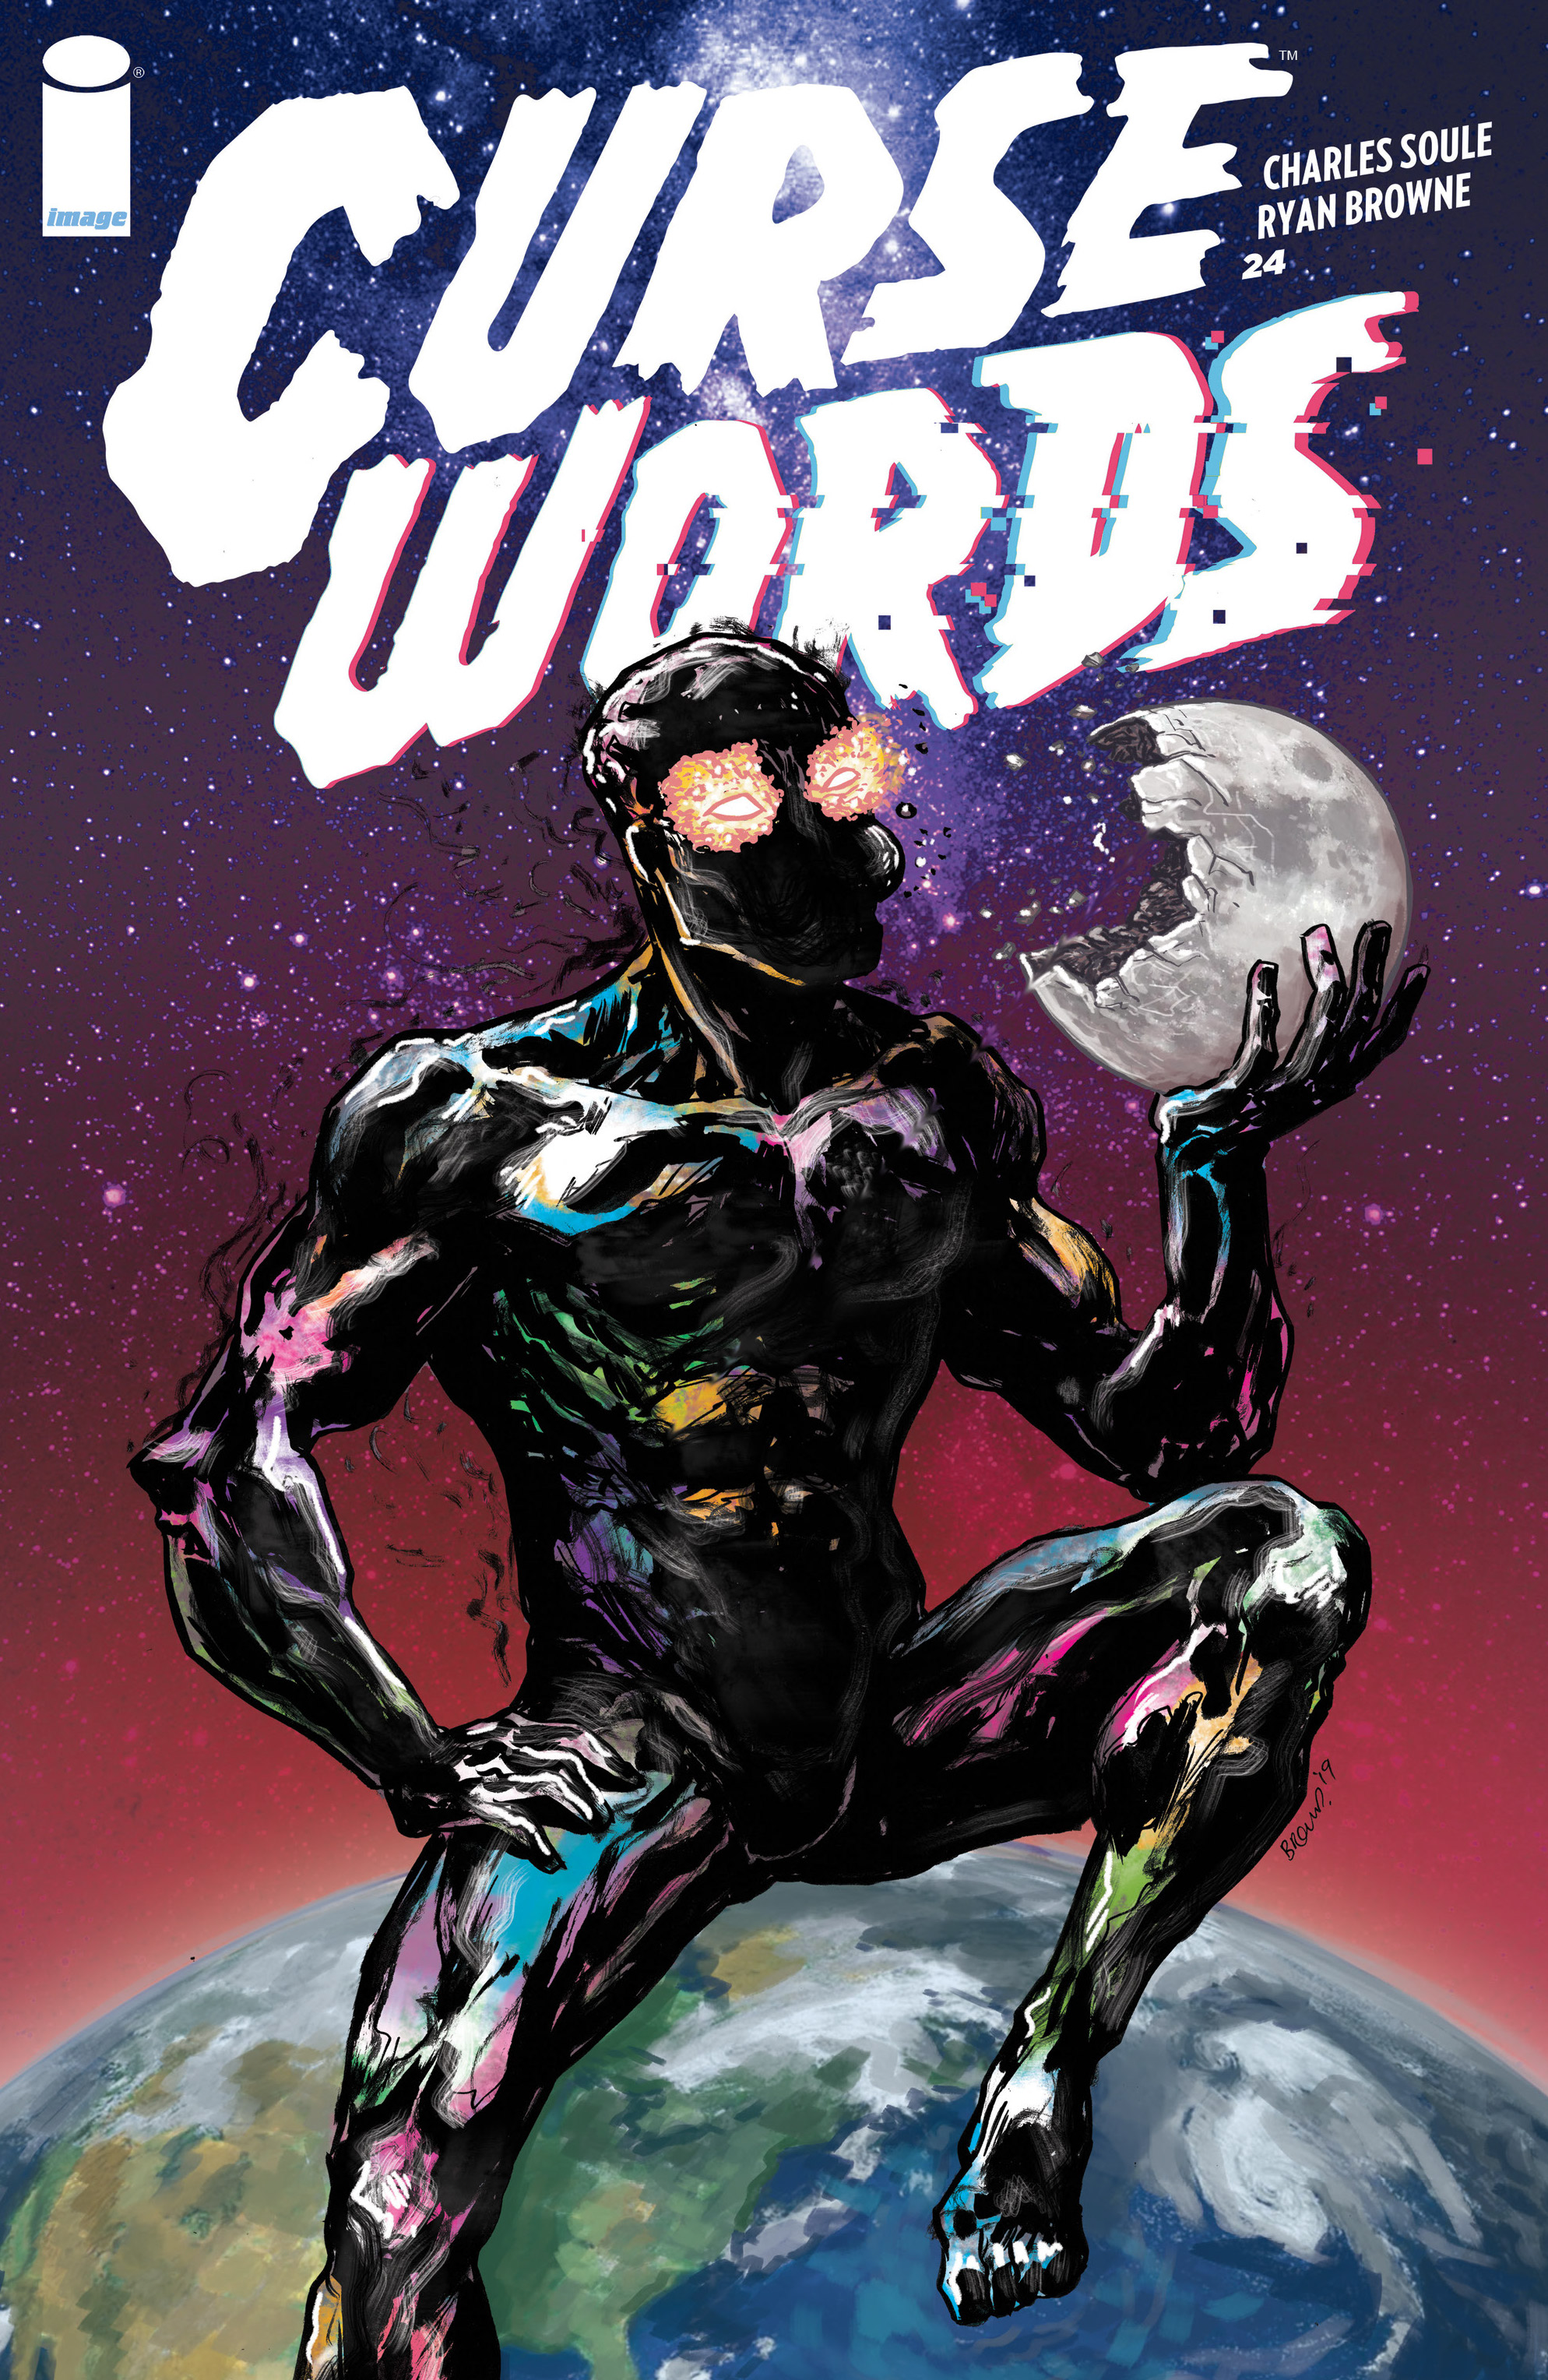 Read online Curse Words comic -  Issue #24 - 1